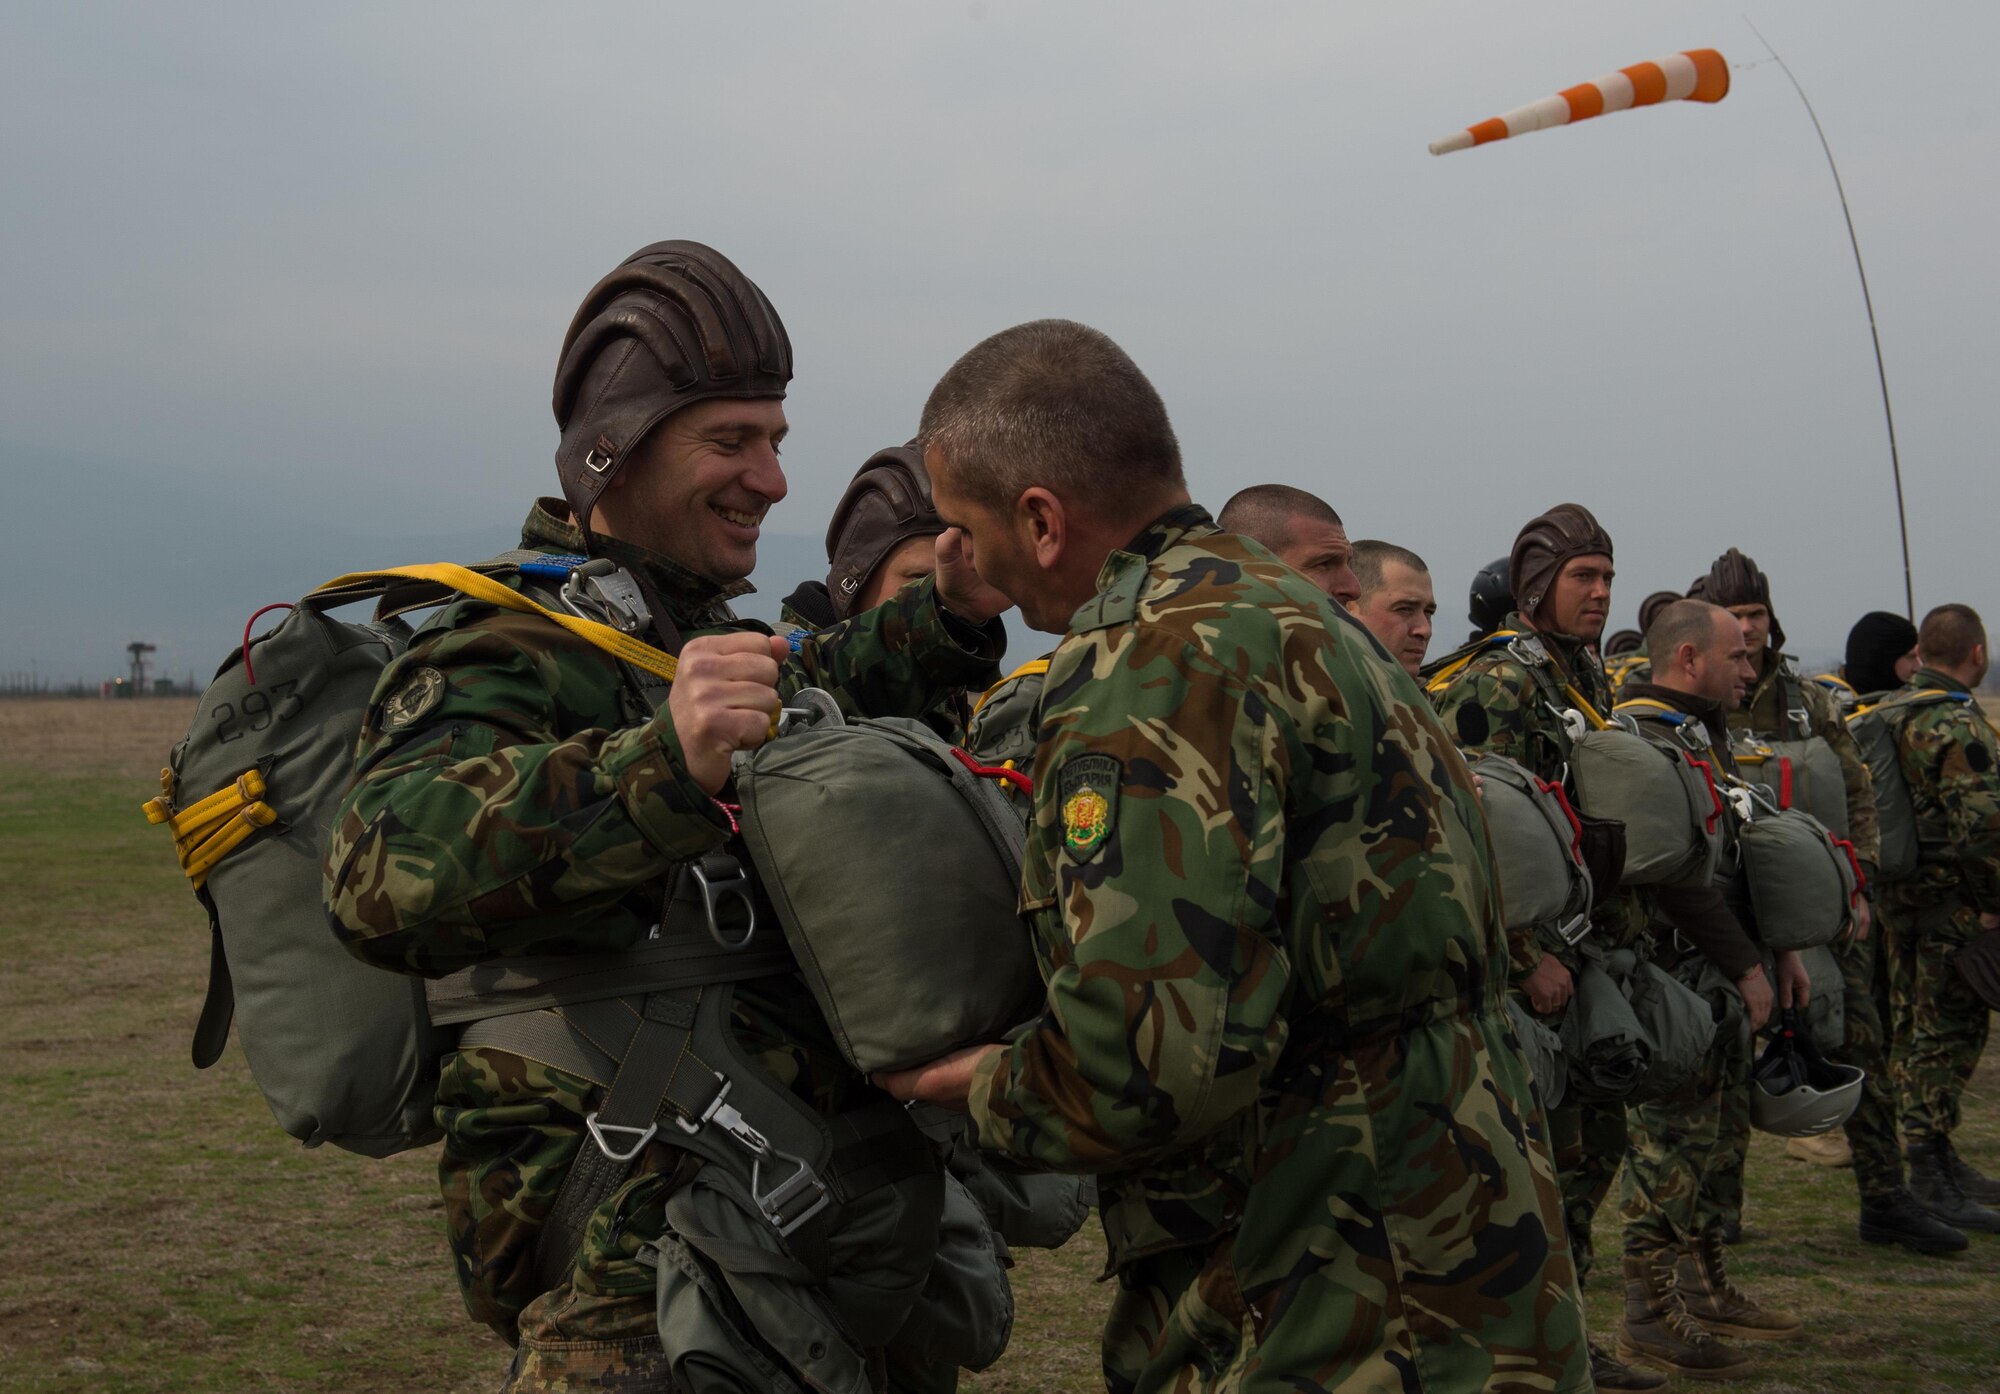 Bulgarian paratroopers inspect gear during Exercise Thracian Spring 17 at Plovdiv Regional Airport, Bulgaria, March 15, 2017. More than 60 U.S. Air Force Airmen from Ramstein Air Base, Germany, participated in combined air operations with Bulgarian military to strengthen relationships while building their nations’ joint military capabilities. The U.S. shares a commitment with Bulgaria, a NATO ally, to promote peace and close cooperation on countering a range of regional and global threats. (U.S. Air Force photo by Staff Sgt. Nesha Humes)